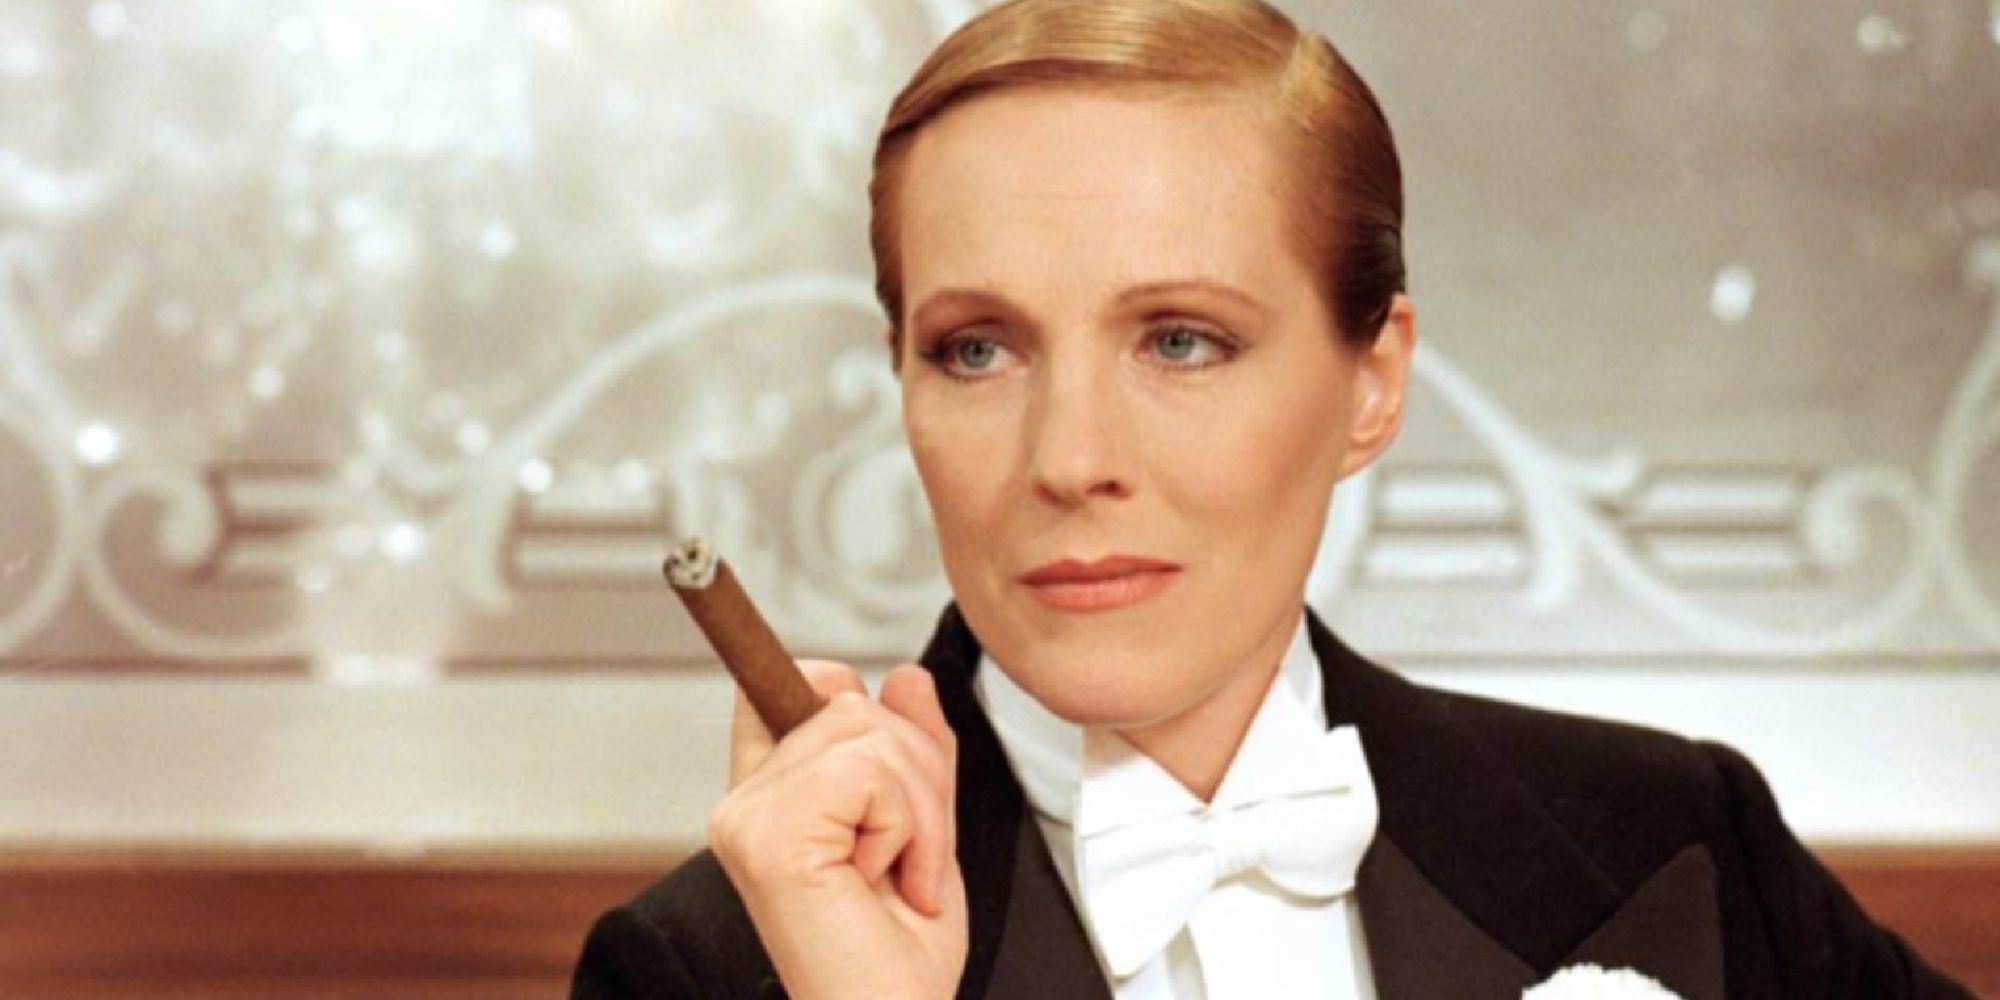 Julie Andrews wearing a tuxedo and holding a cigarette in Victor/Victoria.